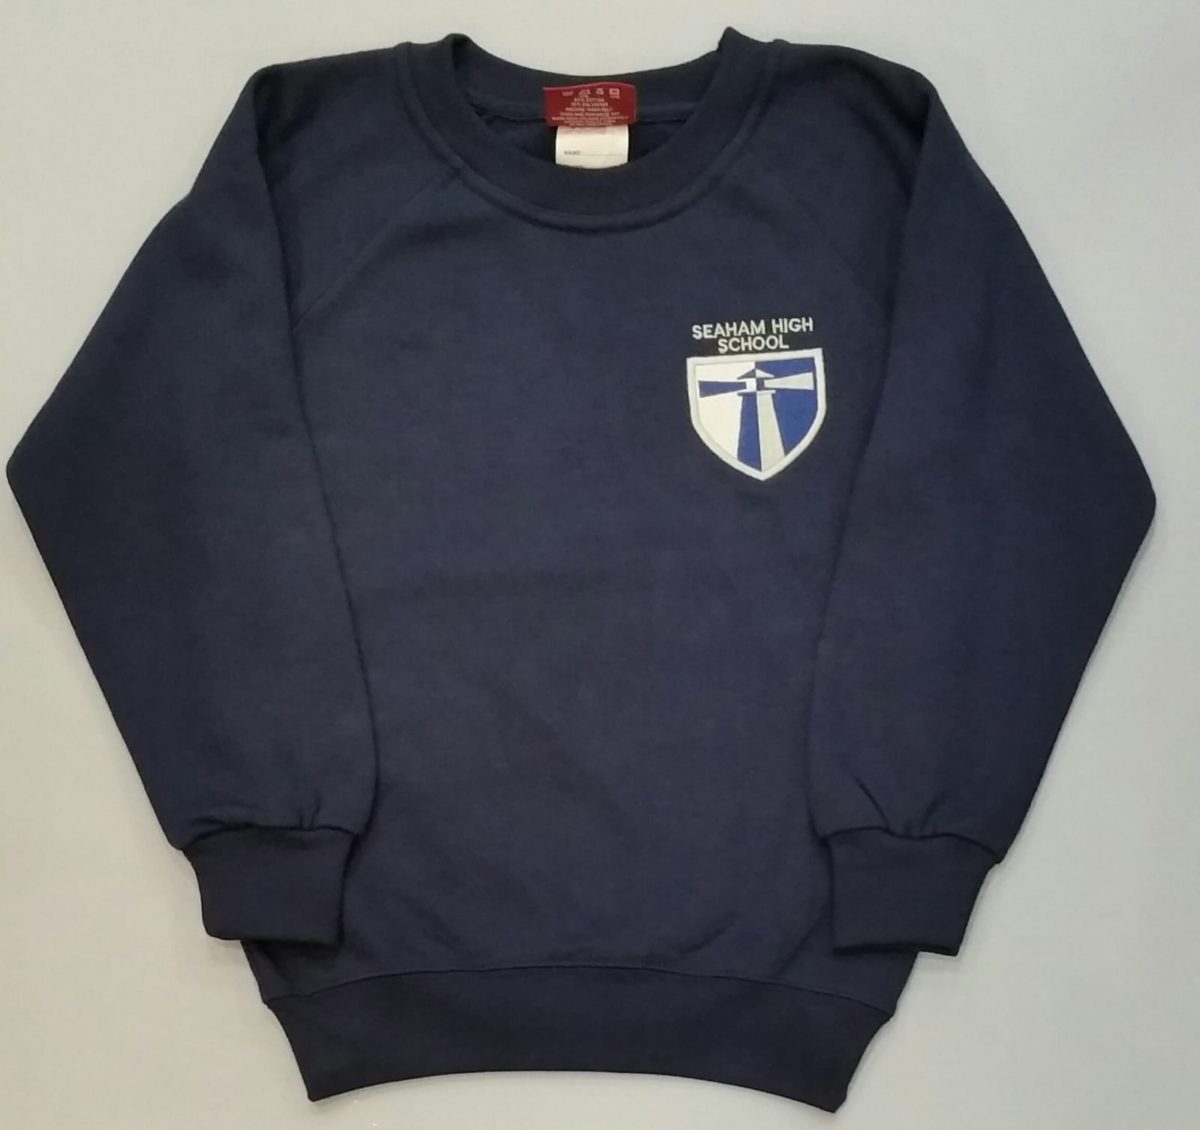 Navy Blue Sports Sweatshirt with Embroidered School logo